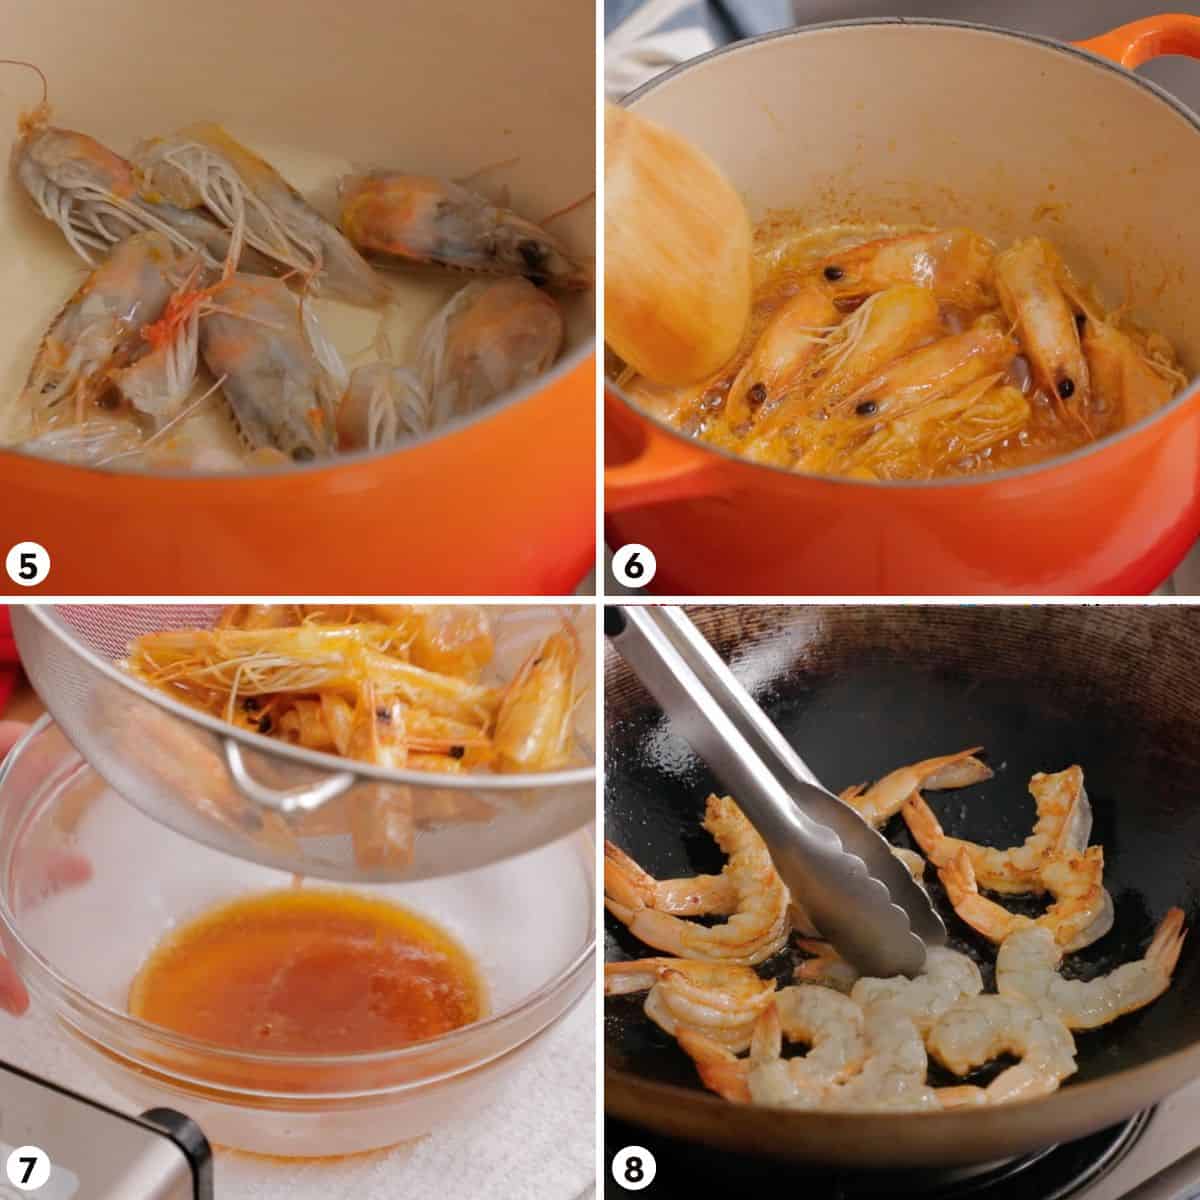 Process shots for making pad thai with glass noodles steps 5-8